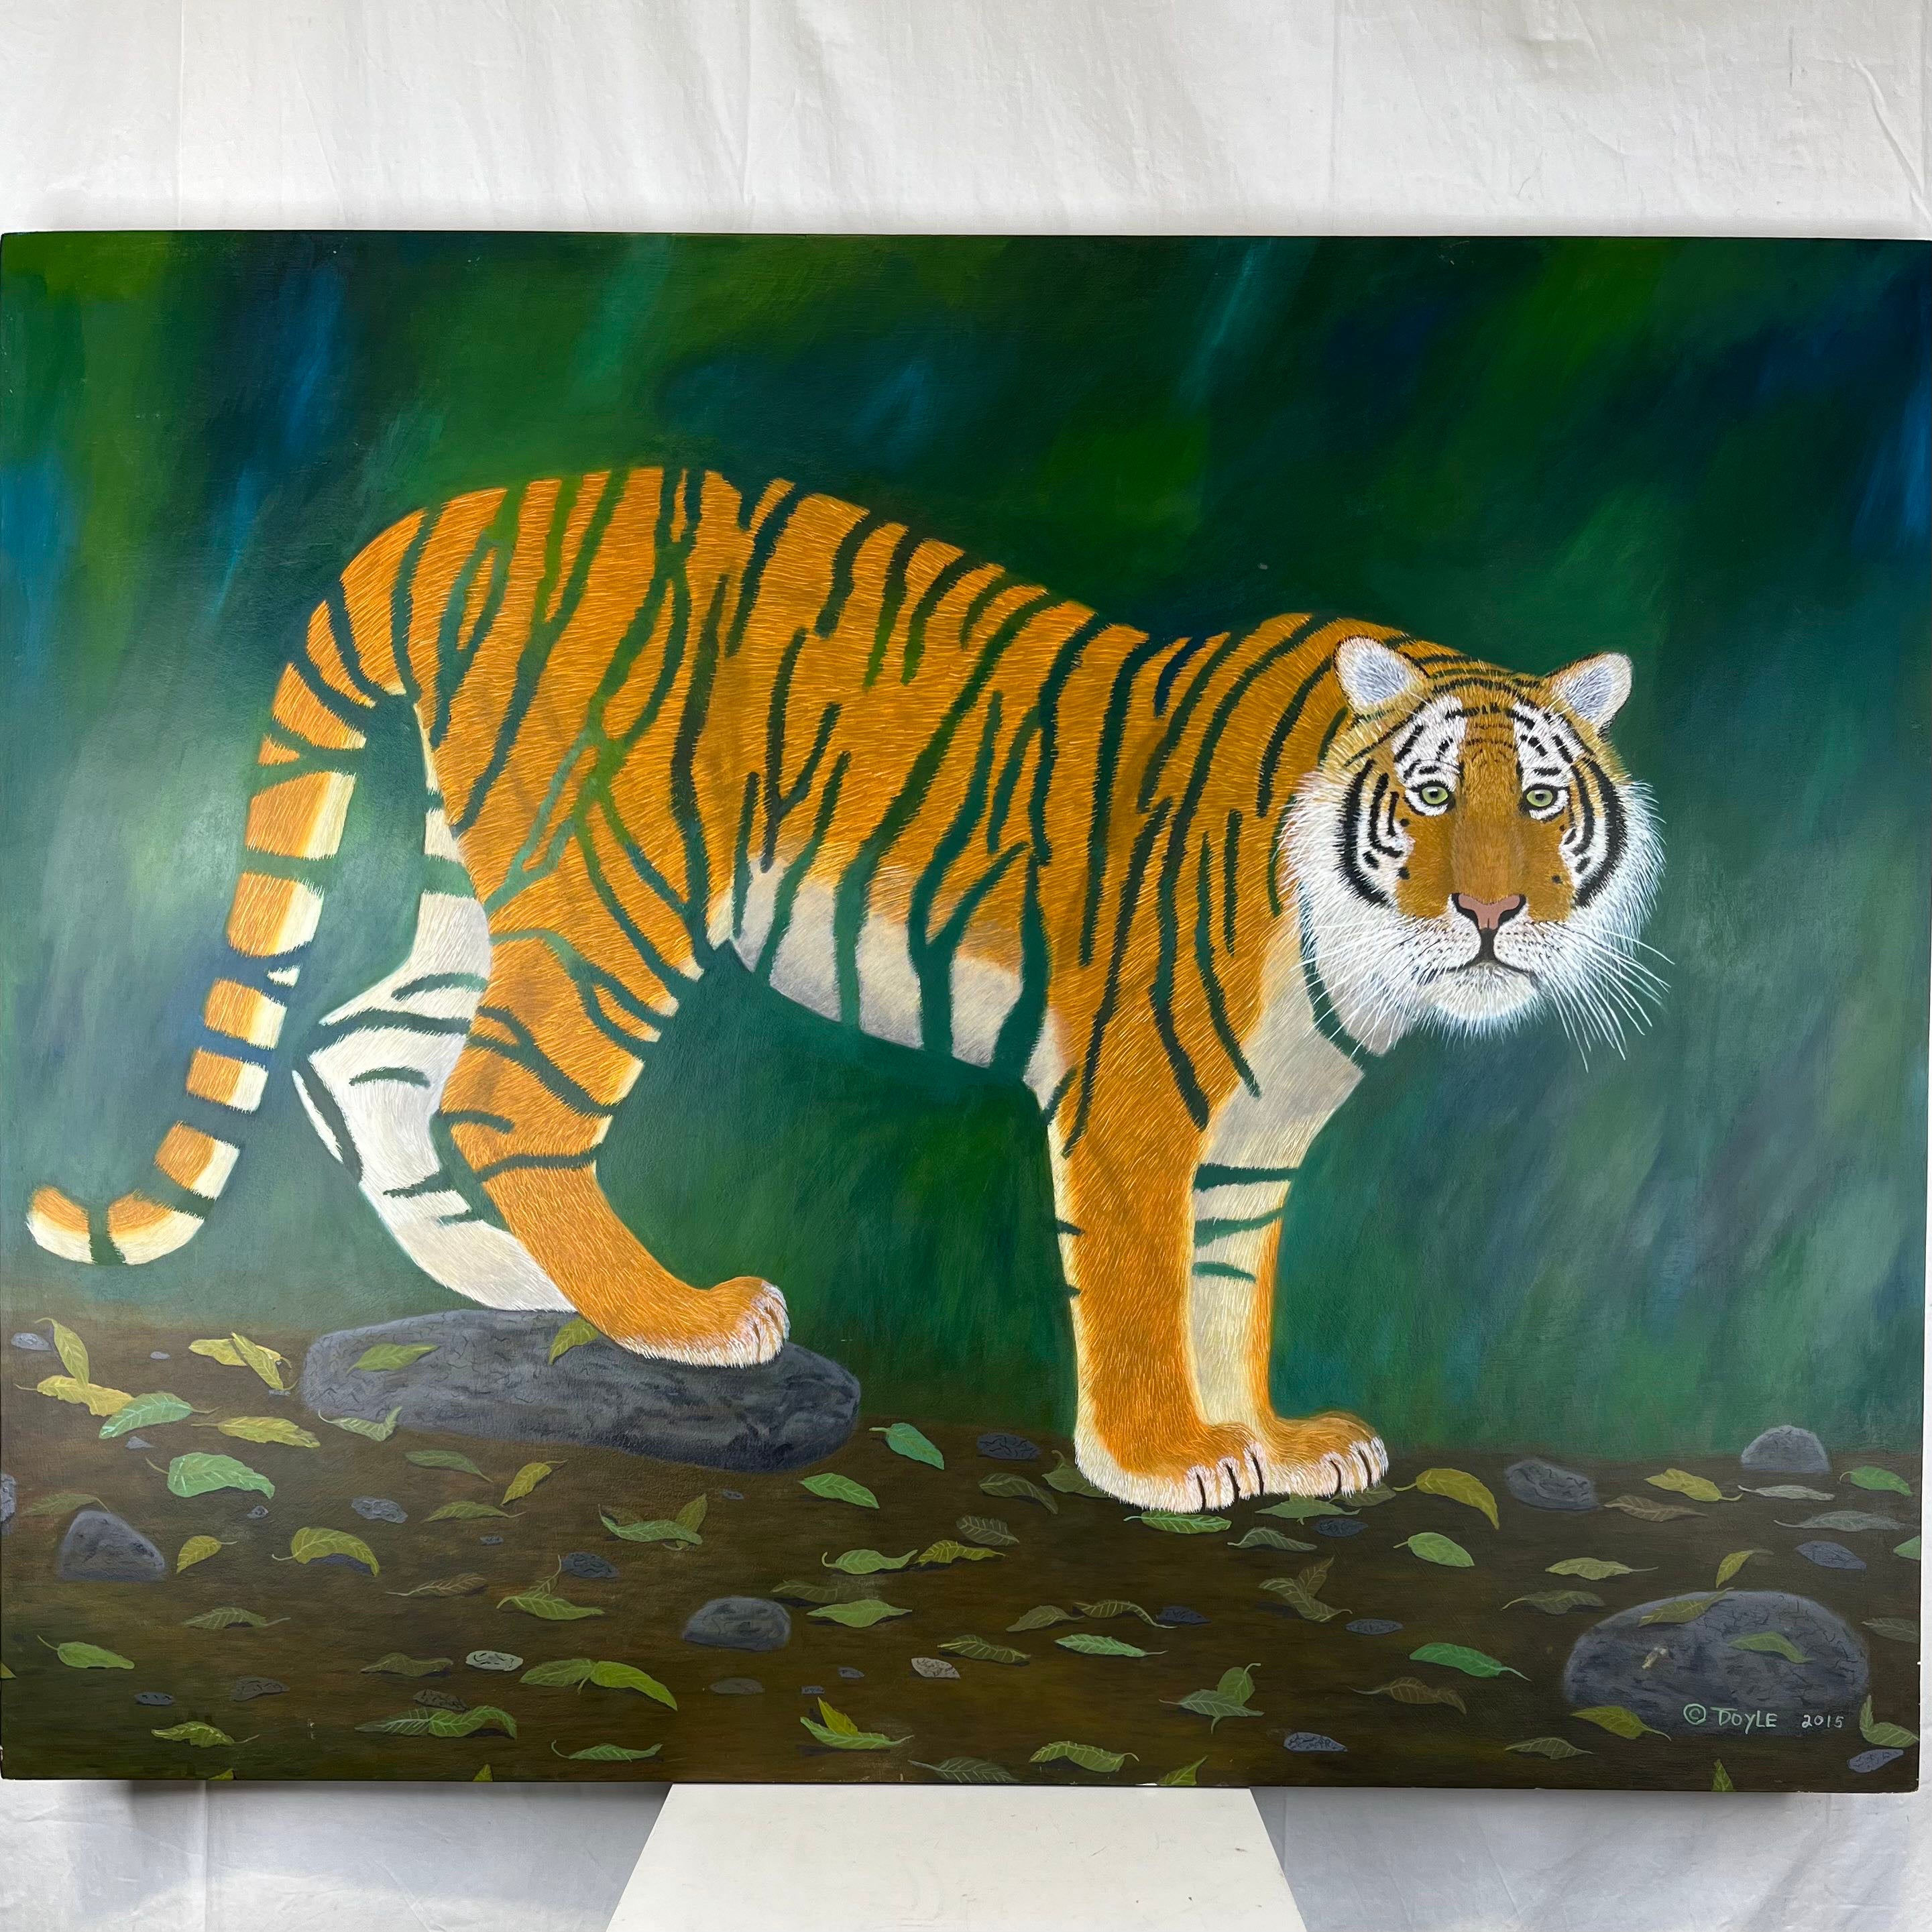 "El Tigre" by Terry Doyle 2015 Oil on Wood Signed Original Painting Wall Art